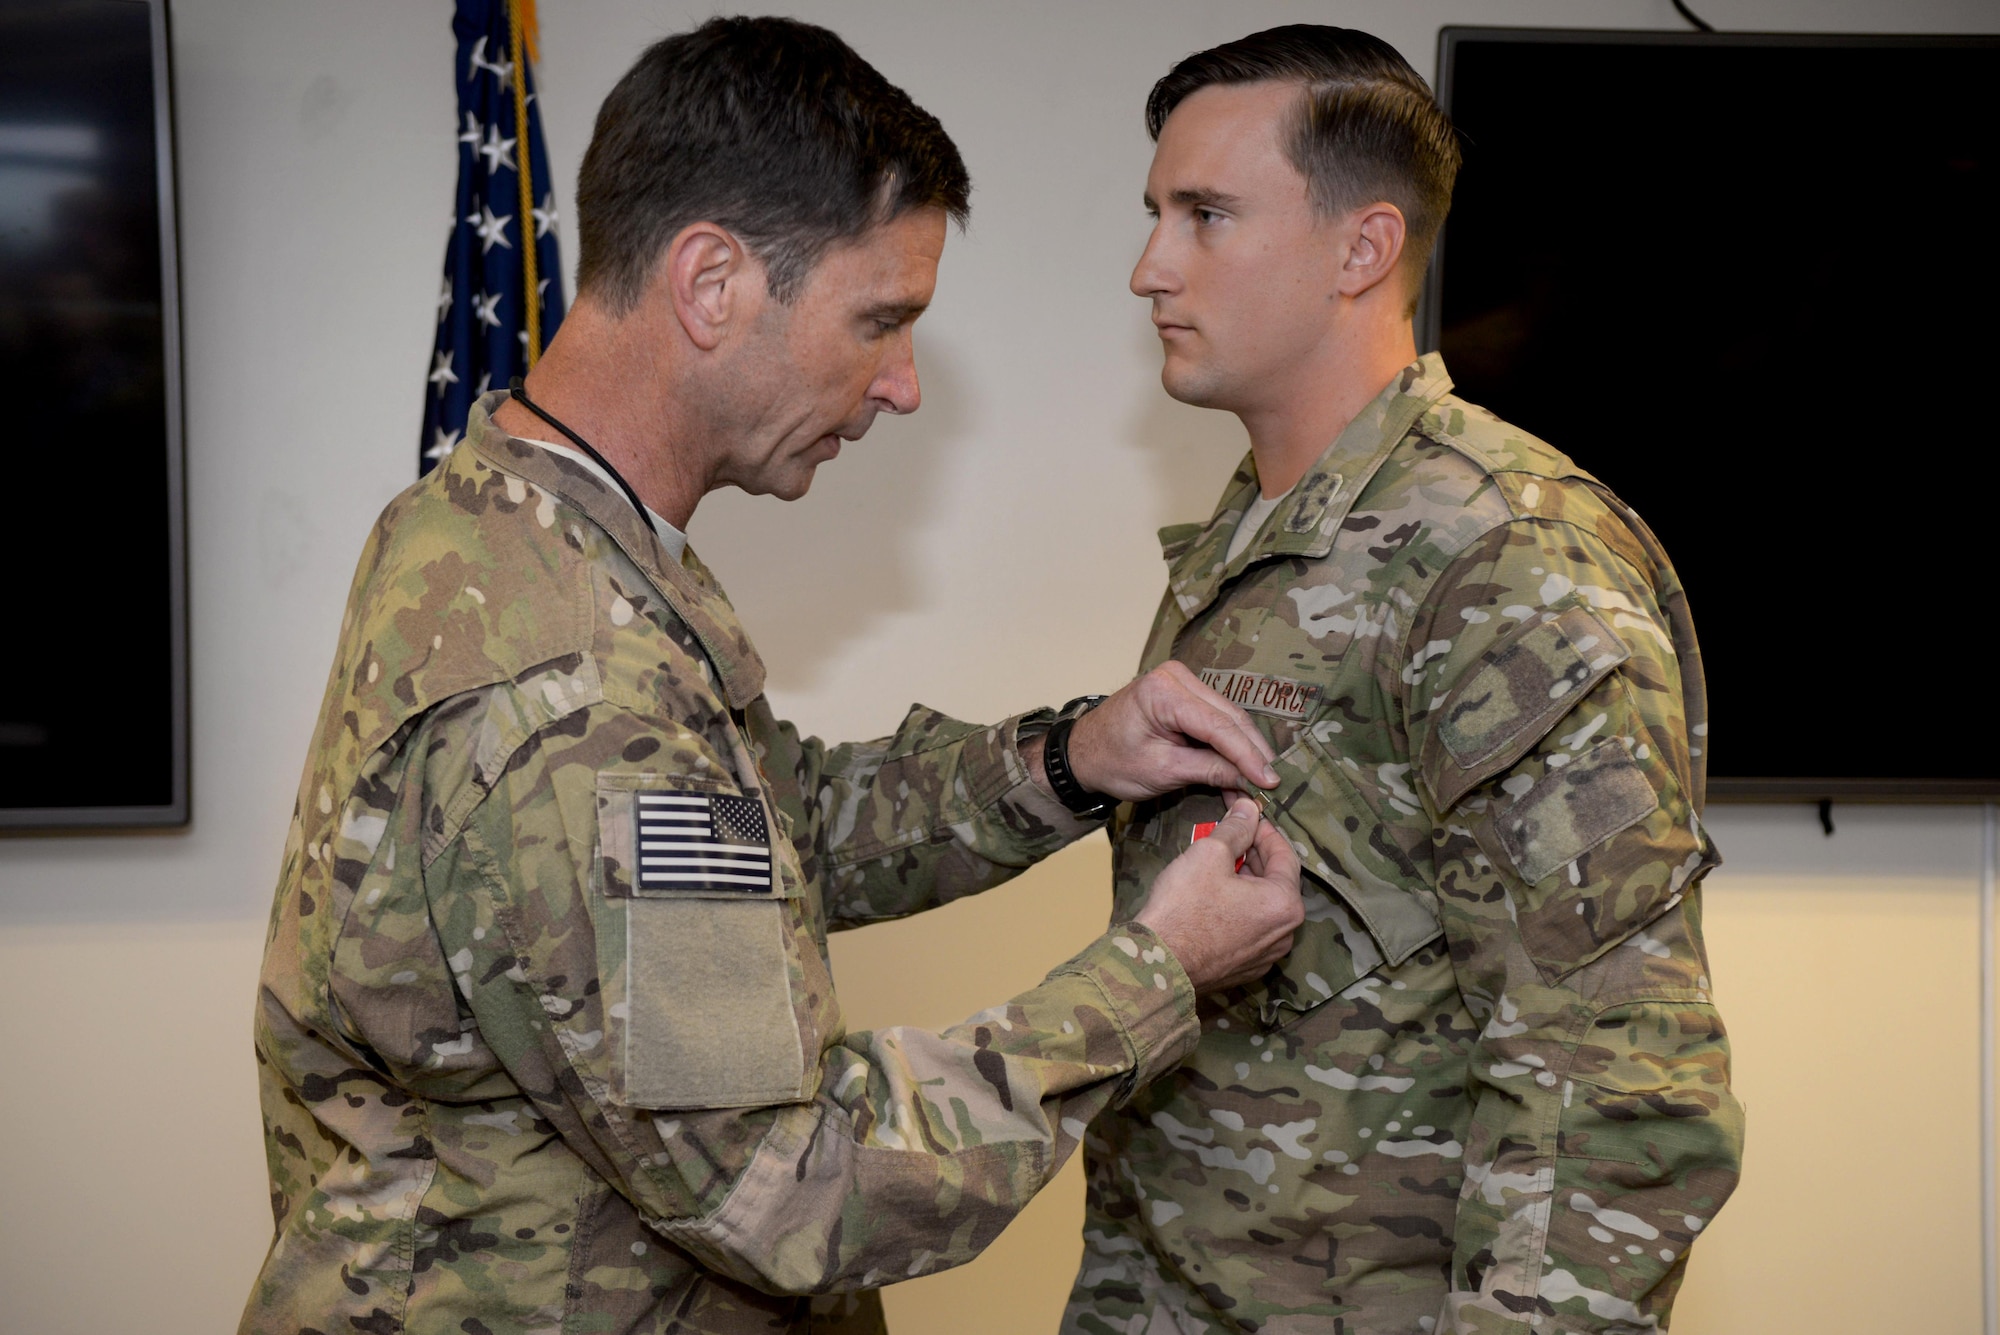 U.S. Air Force Col. Matthew Smith, left, 352d Special Operations Wing commander, pins the Bronze Star Medal on U.S. Air Force Capt. Anthony Chiaro, right, 321st Special Tactic Squadron, June 27, 2017, on RAF Mildenhall, England. While deployed, Chiaro exhibited meritorious service during combat operations, thus earning the Bronze Star Medal. (U.S. Air Force photo by Airman 1st Class Tenley Long)